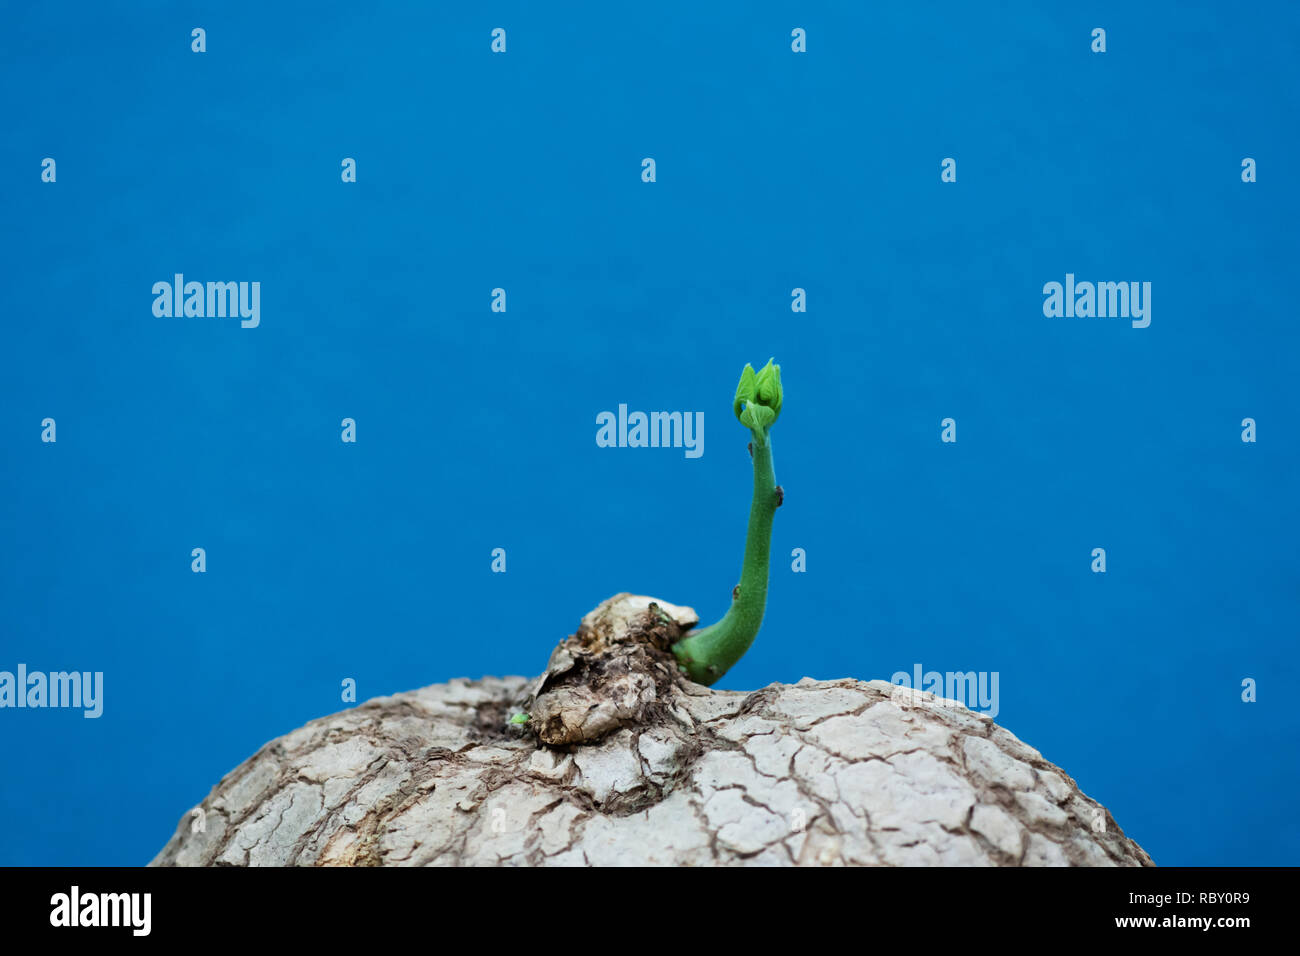 sapling of Stephania pierrei Diels on blue background. home decoration young plant growing on the top of  Stephania pierrei Diels root. Stock Photo